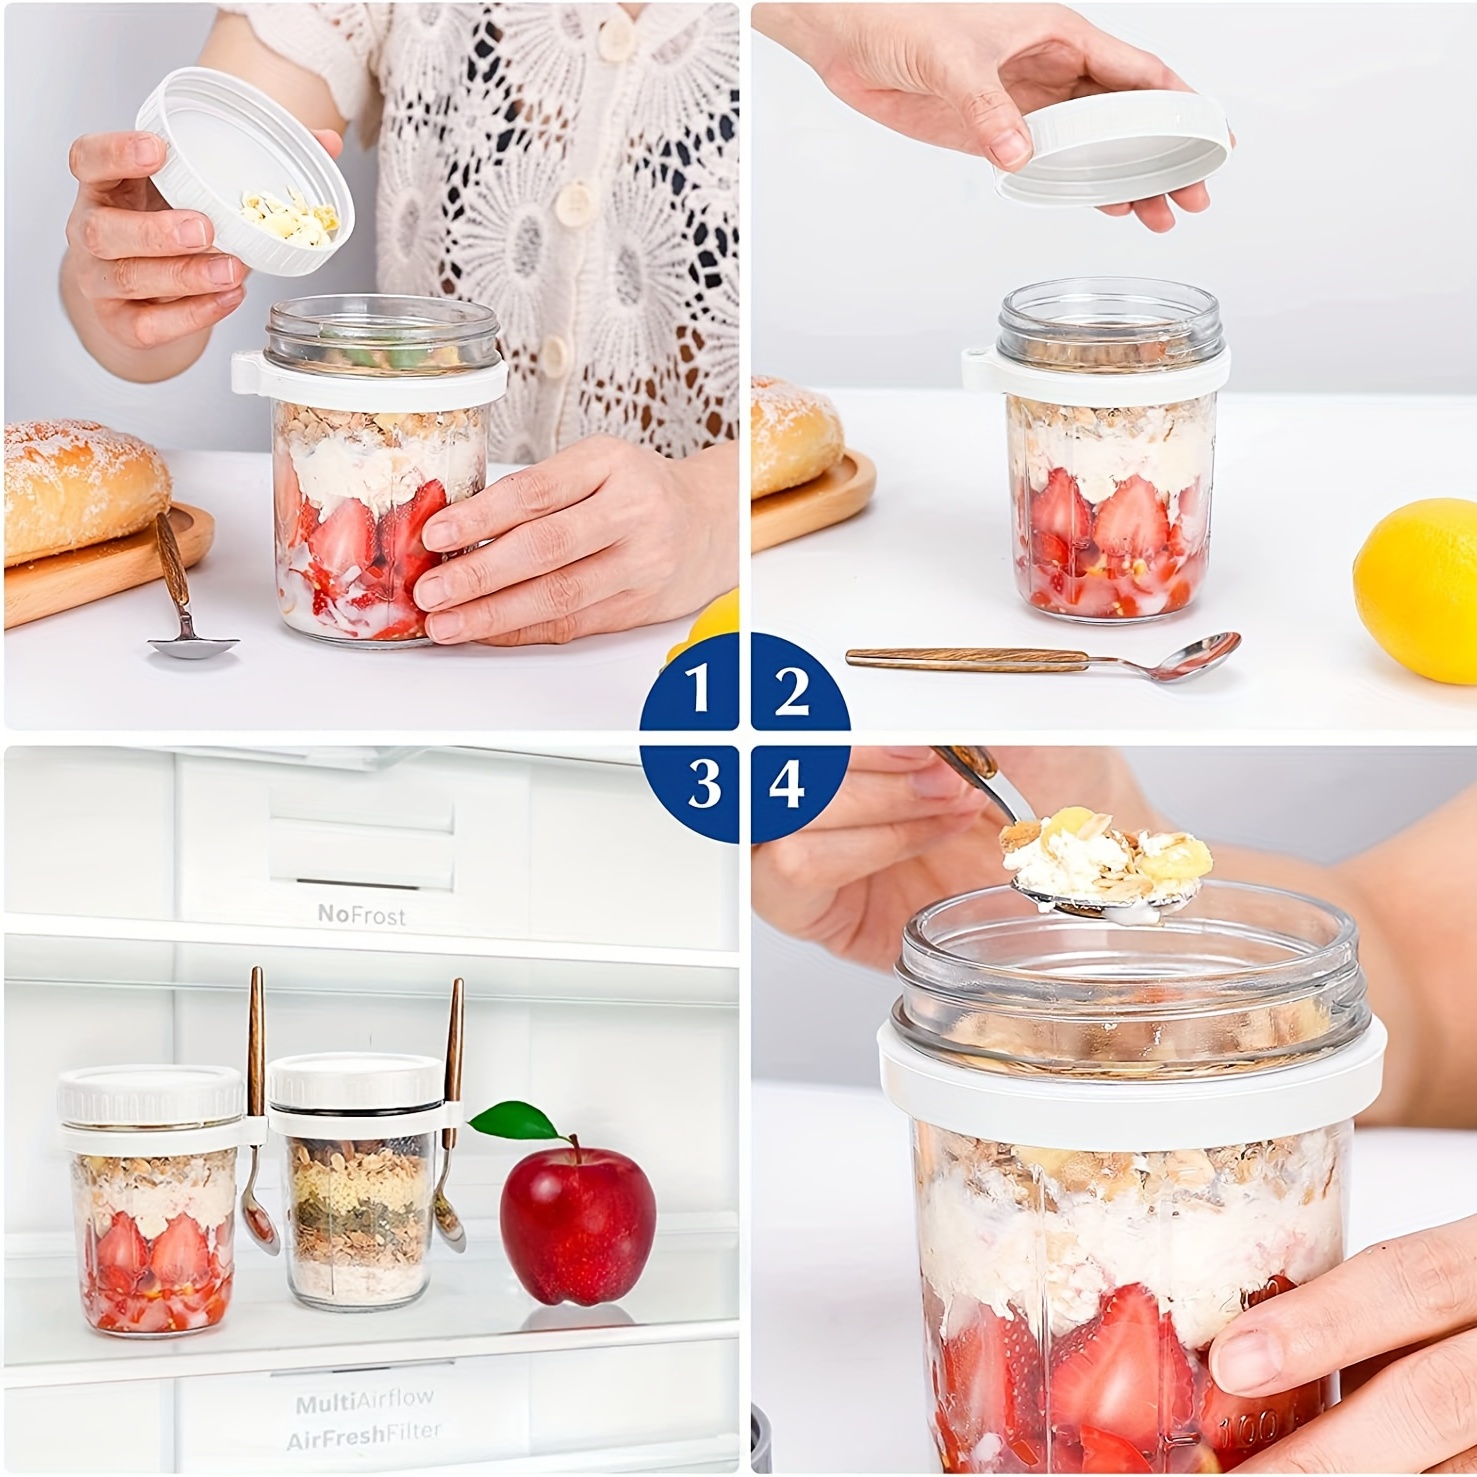 Overnight Oats Containers With Lids And Spoons: 24 Oz Mason Jars